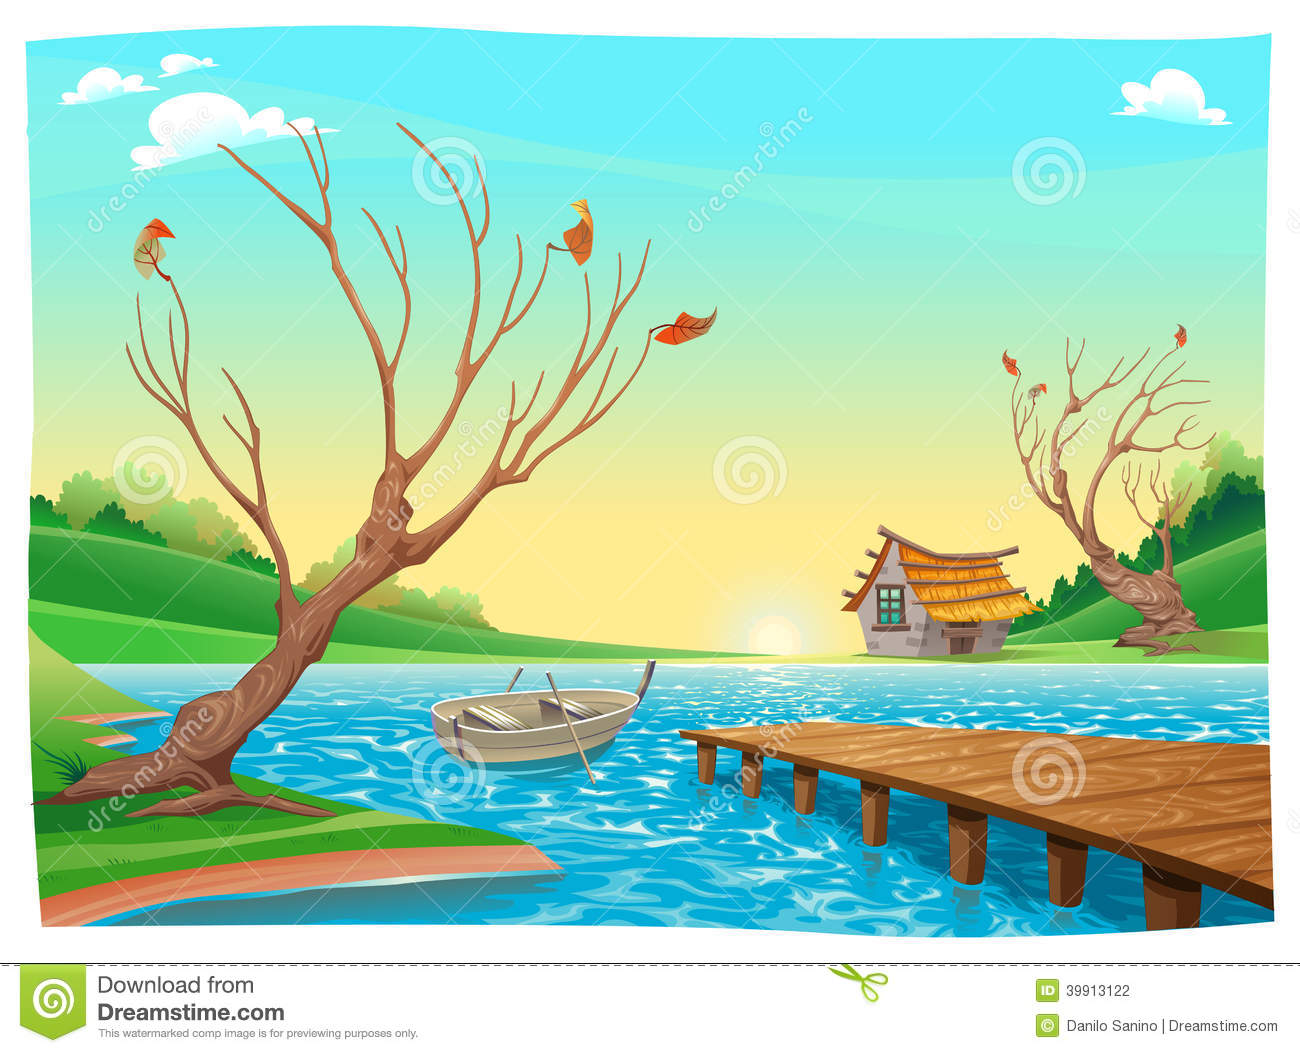 Lake boats clipart - Clipground